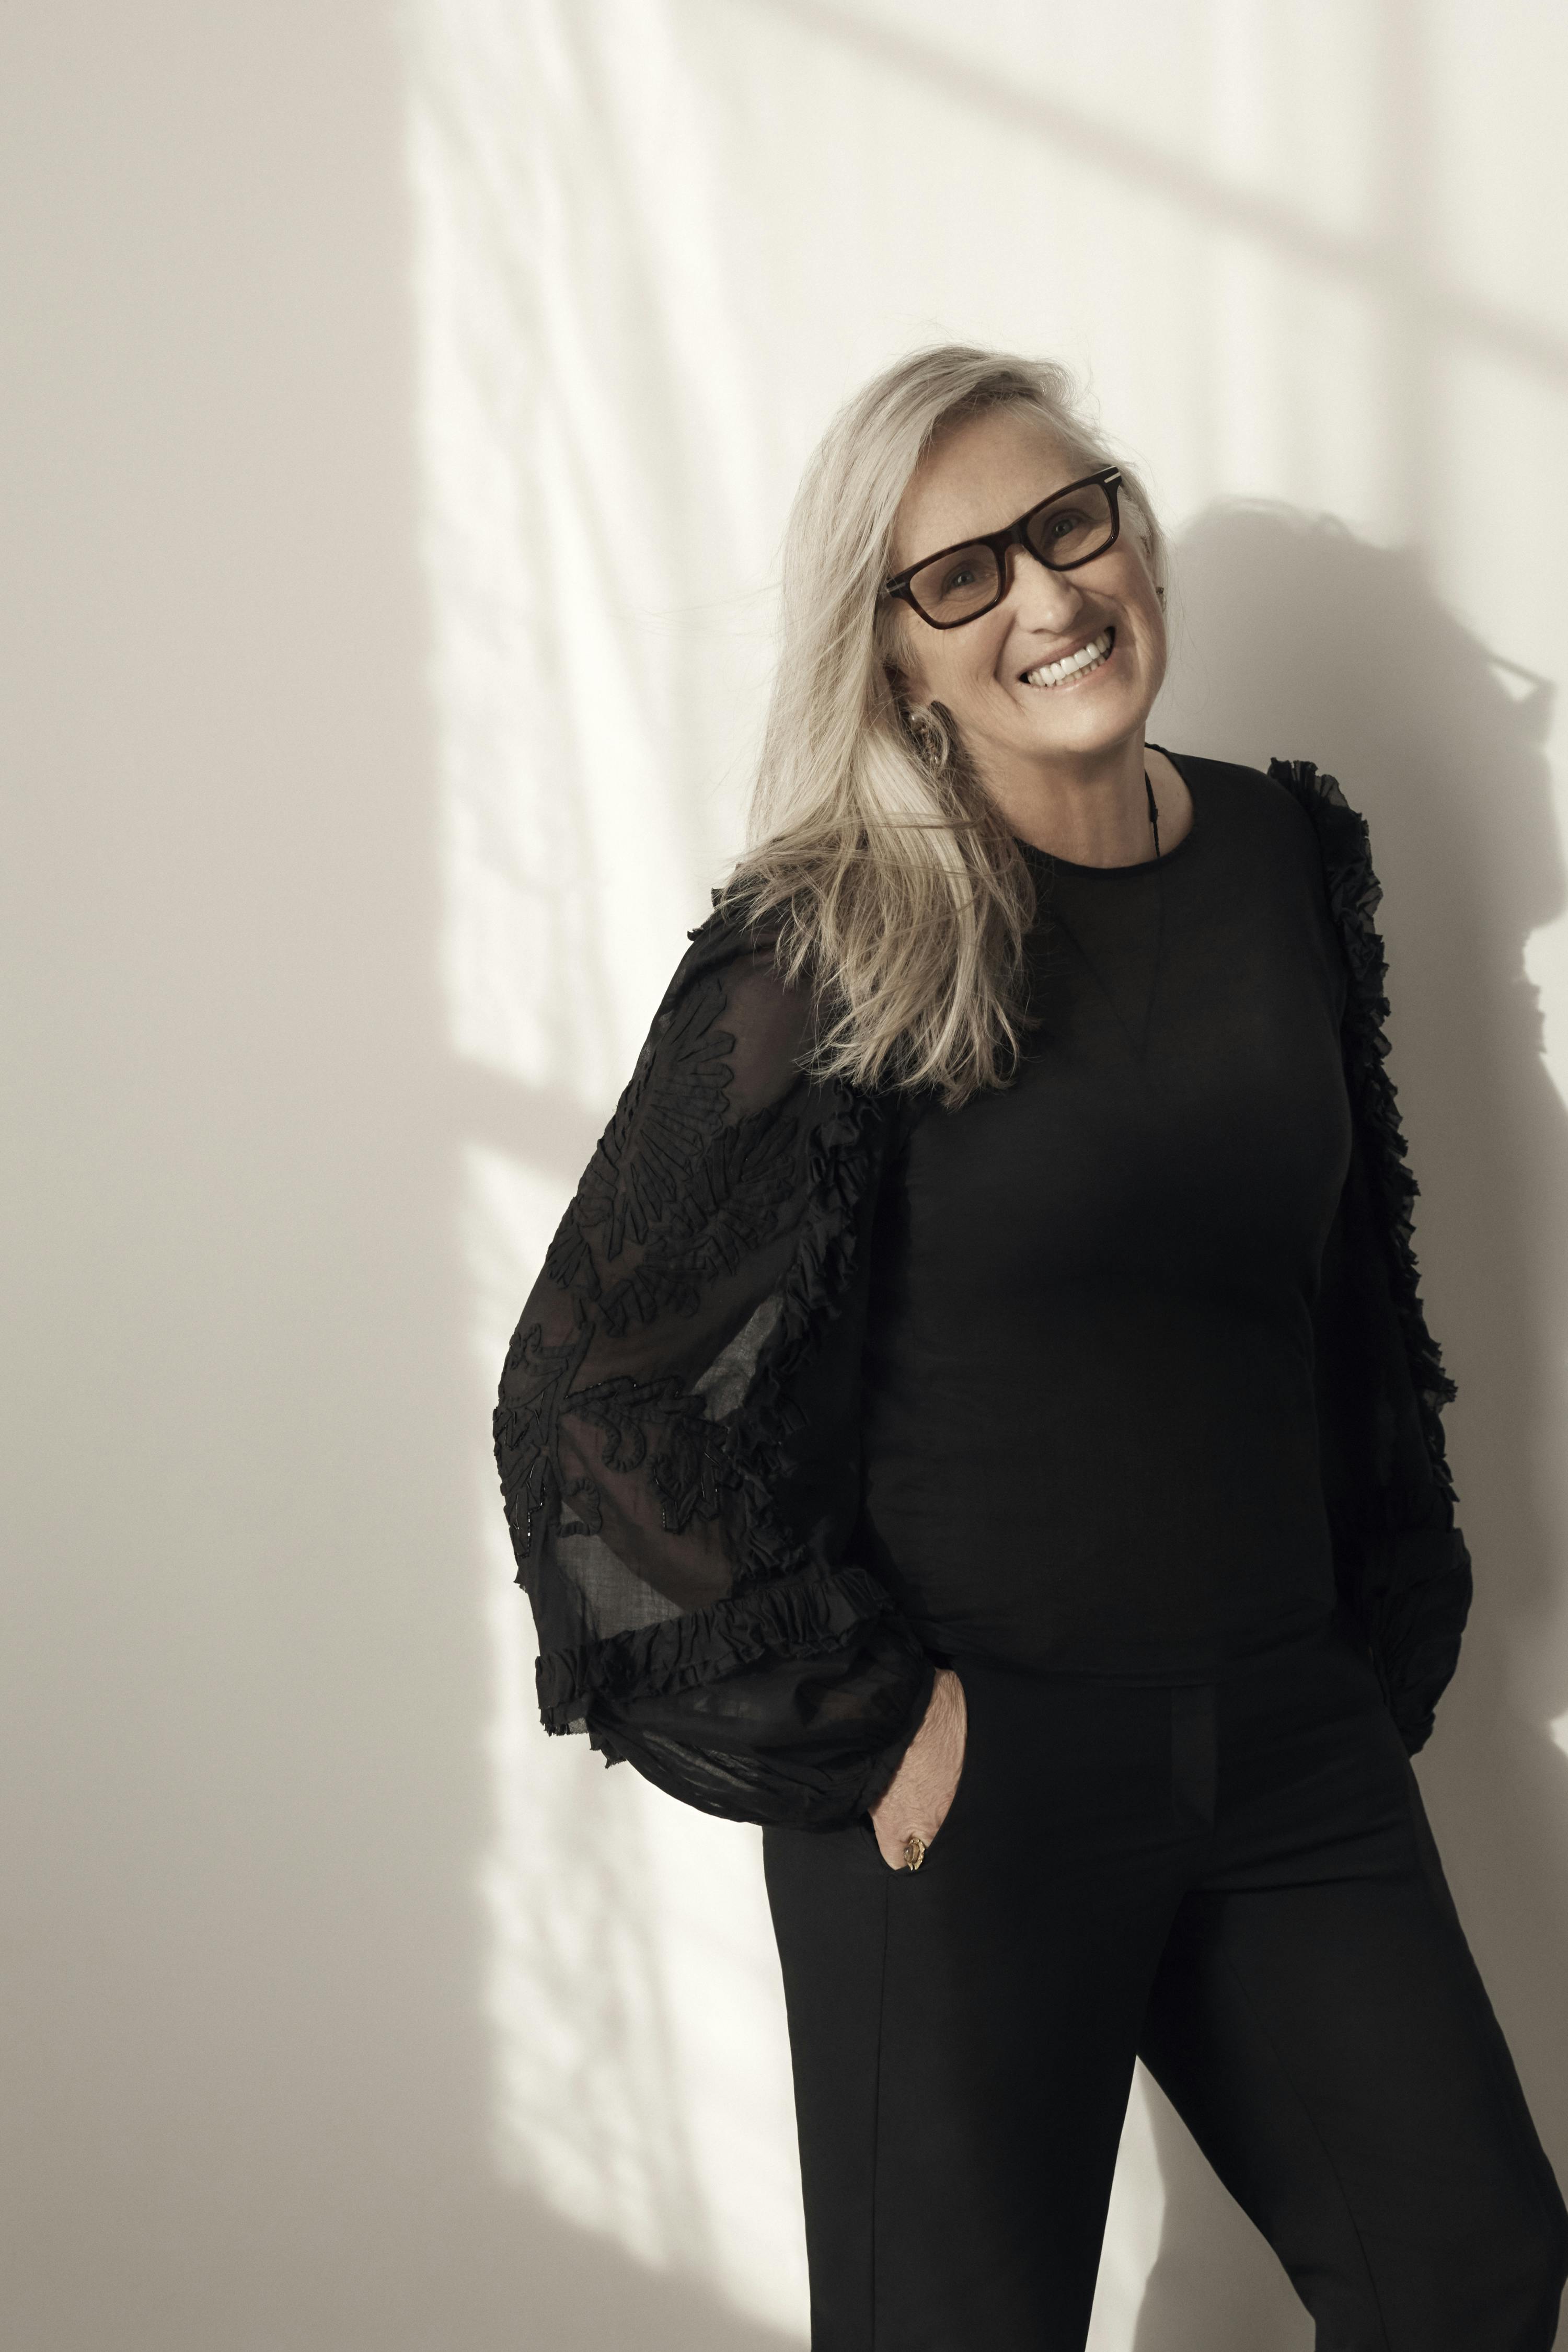 Jane Campion wears an all-black outfit and chunky black glasses. She leans again a white wall.